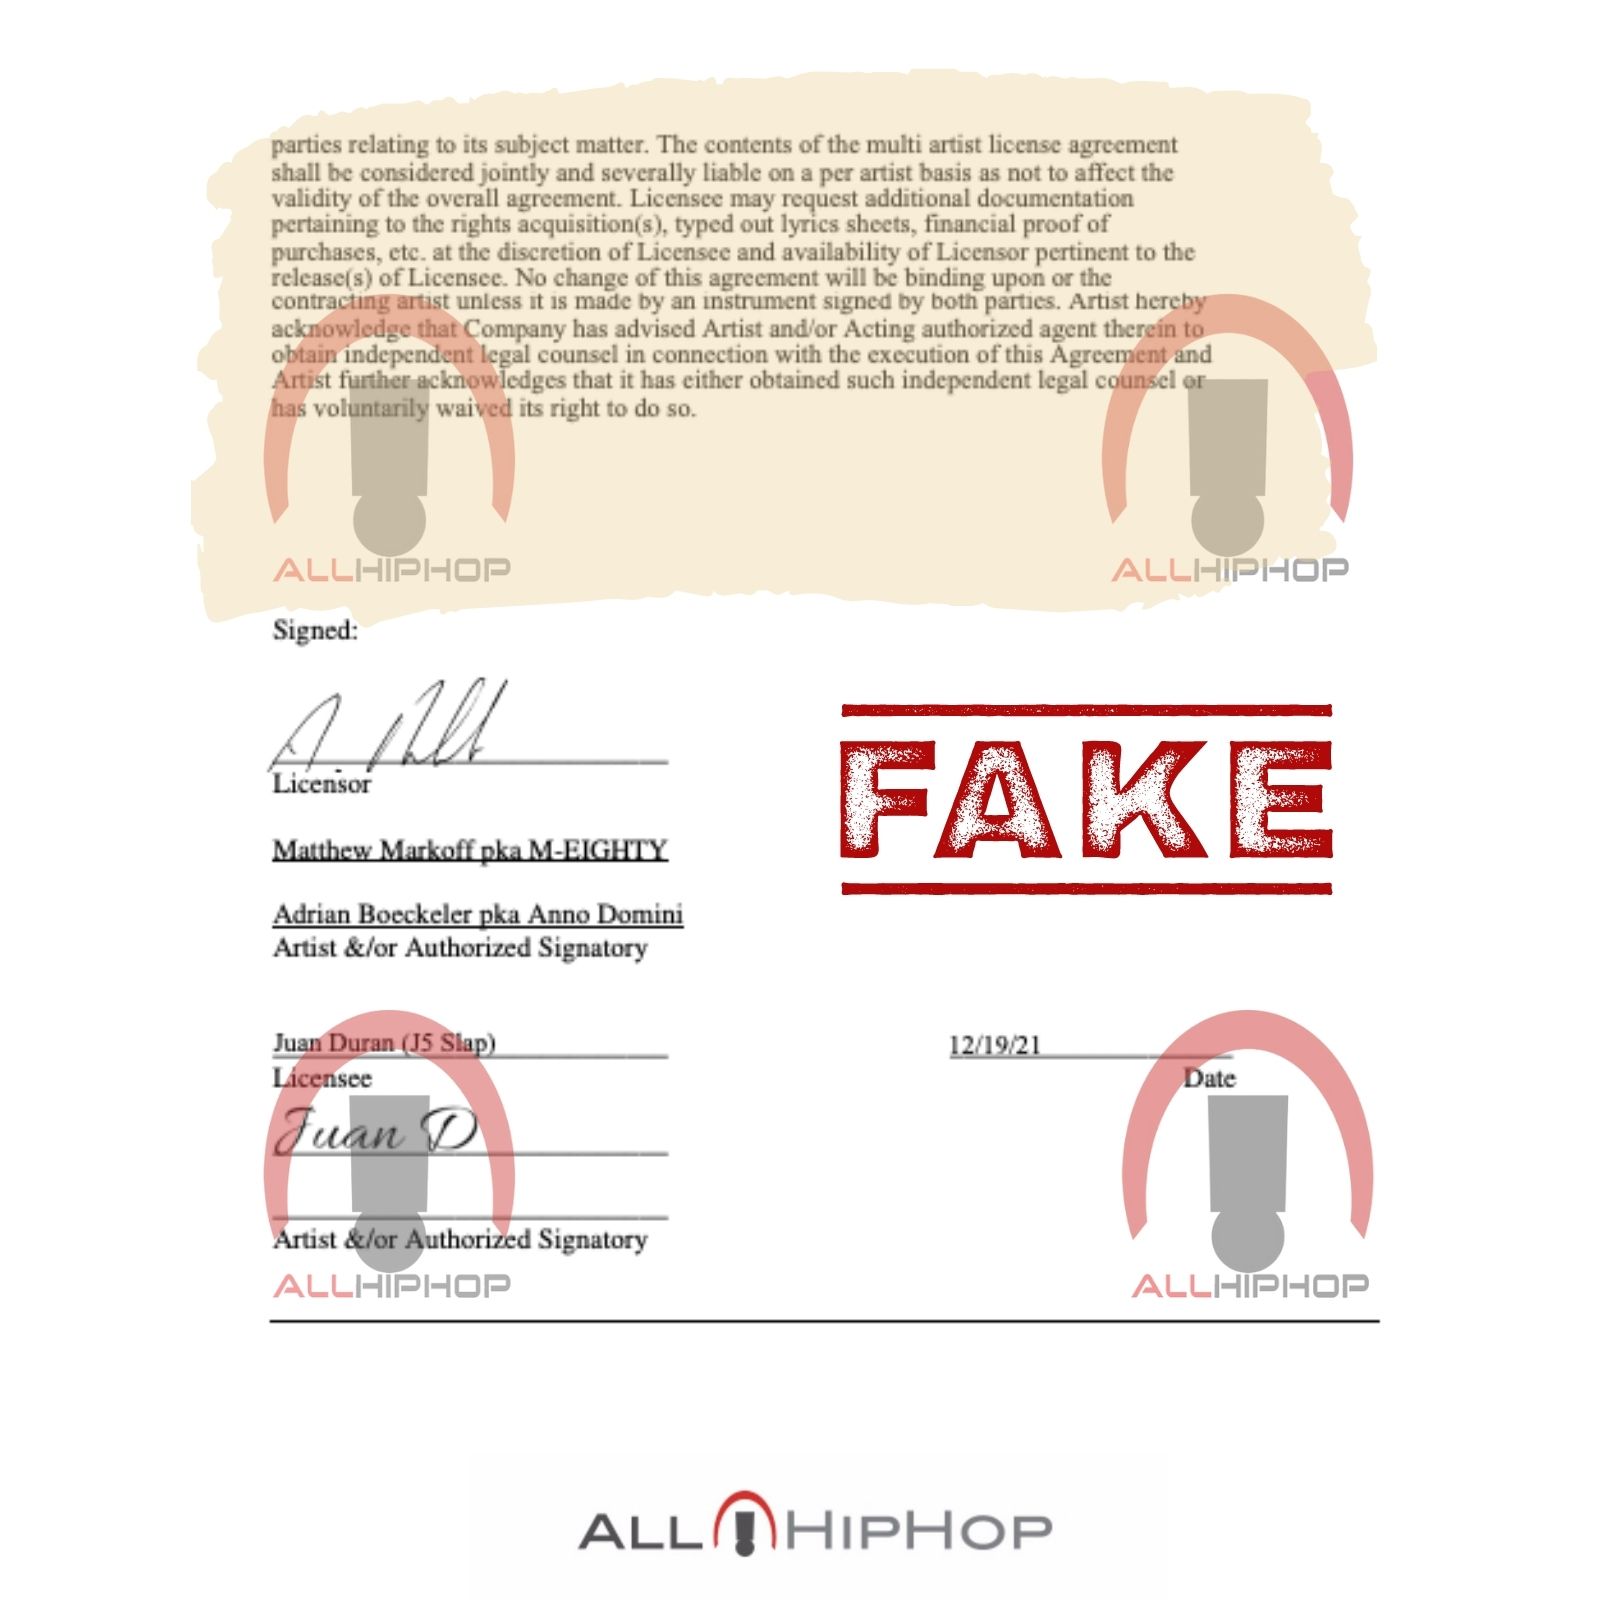 M80 Provides Fake Contract For Fake Snoop Dogg Song "Police"